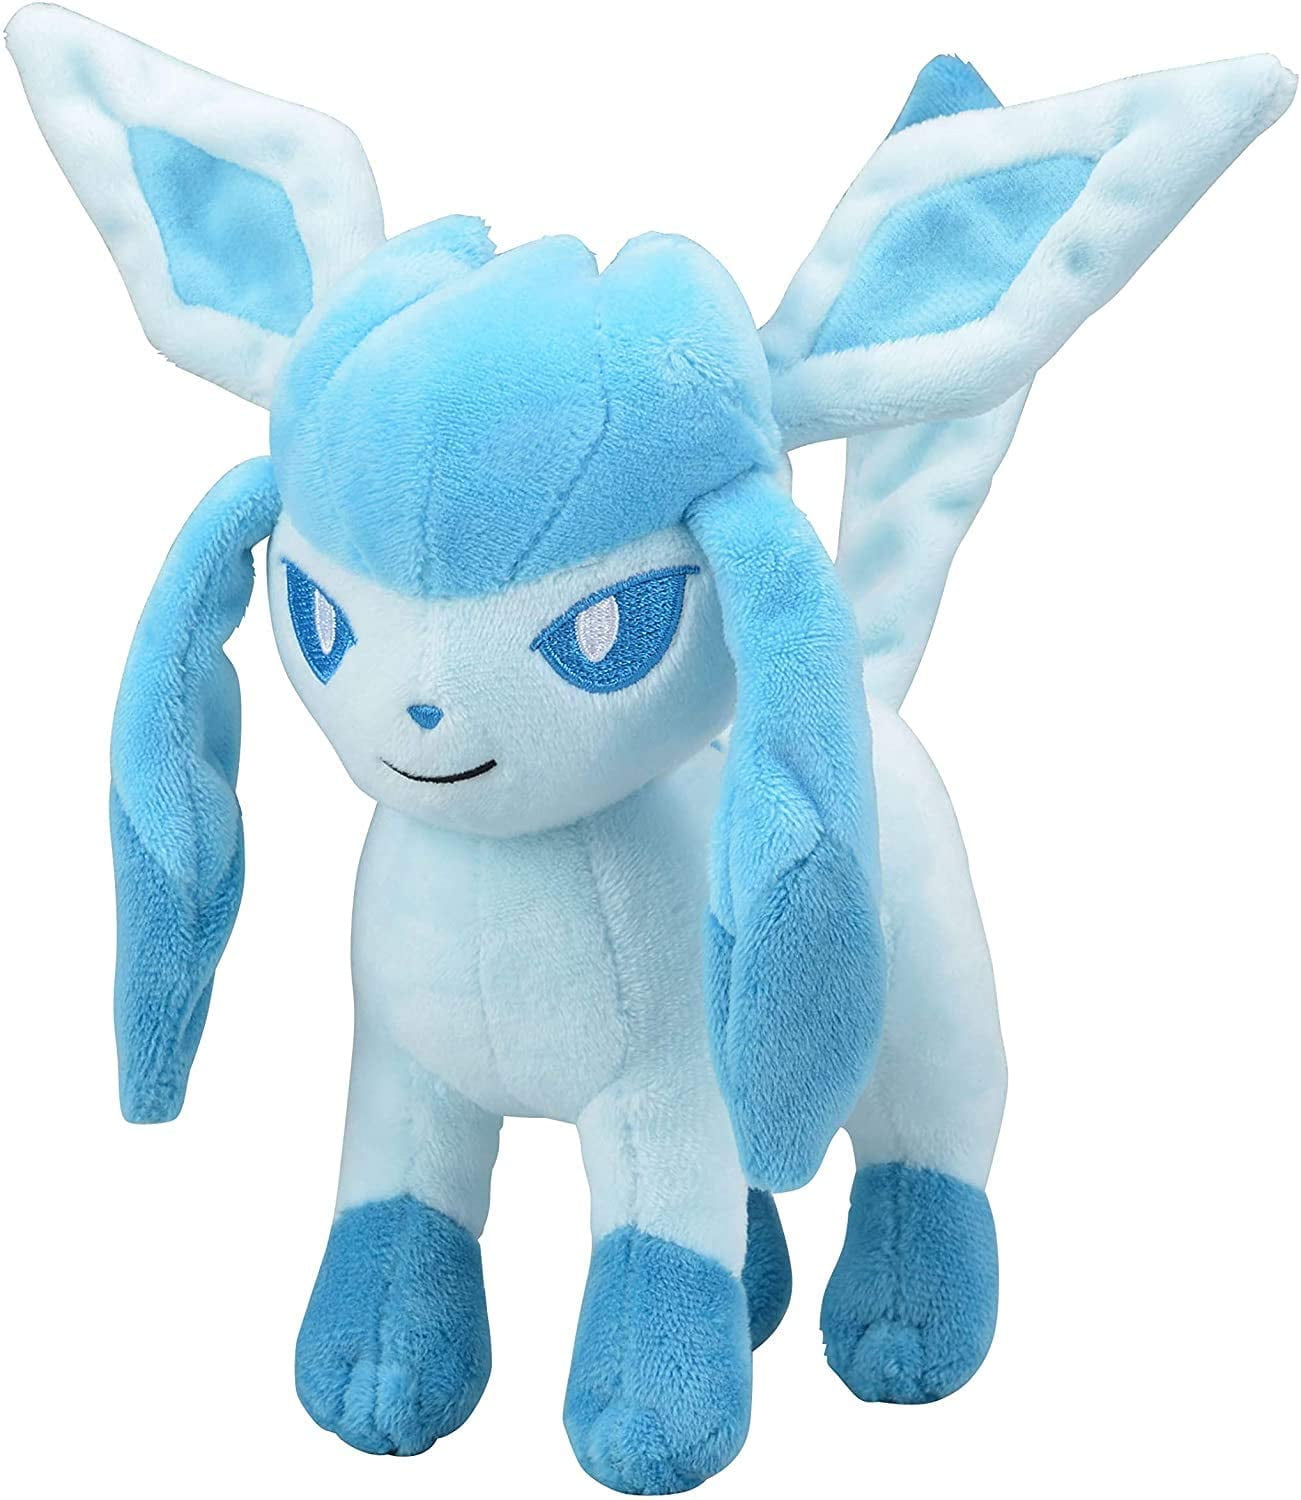 Glaceon 7" Plush Glacia Game Character Stuffed Toy Cartoon Soft Doll